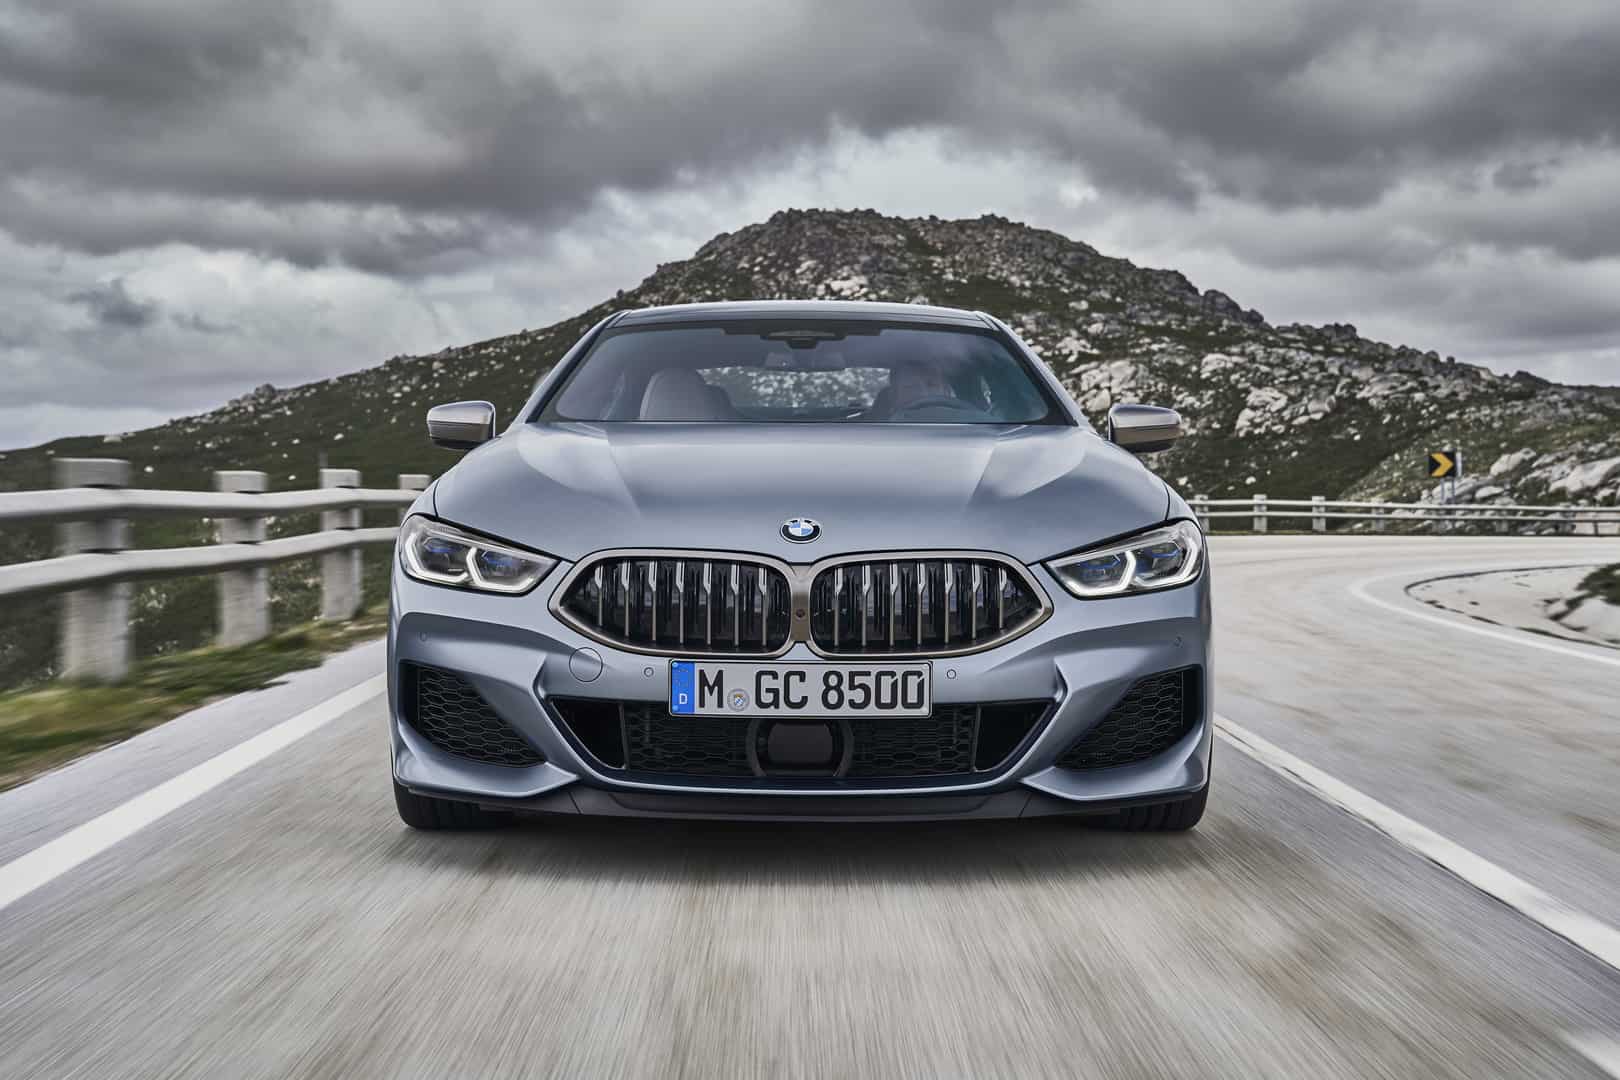 The Bmw 8 Series Gran Coupe Is Ready To Hit The Road